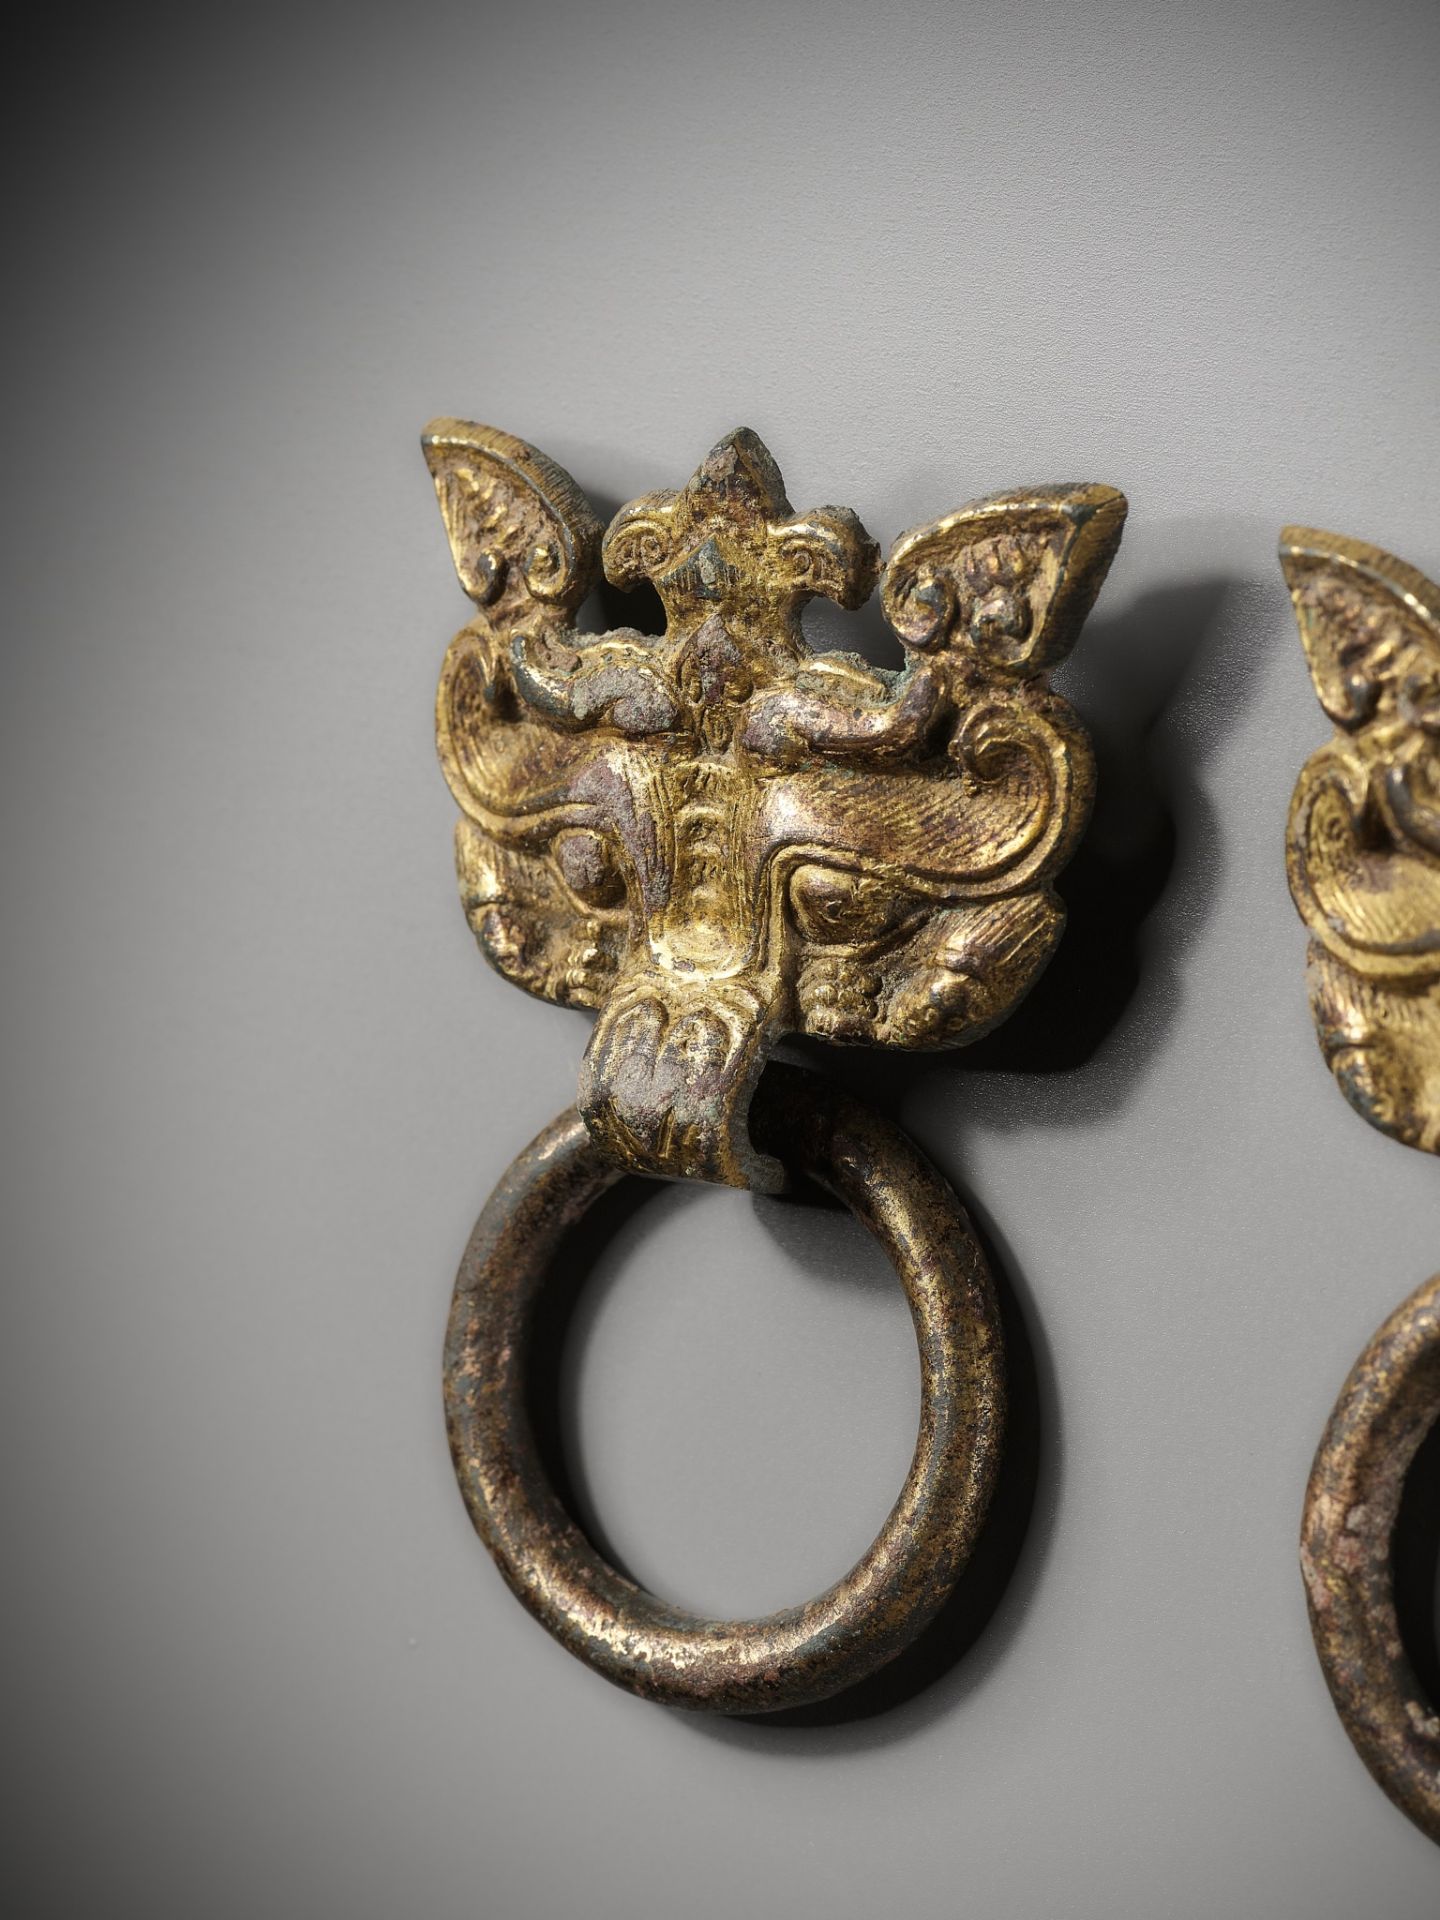 A PAIR OF GILT-BRONZE TAOTIE MASKS WITH RING HANDLES, WARRING STATES TO HAN DYNASTY - Image 2 of 11